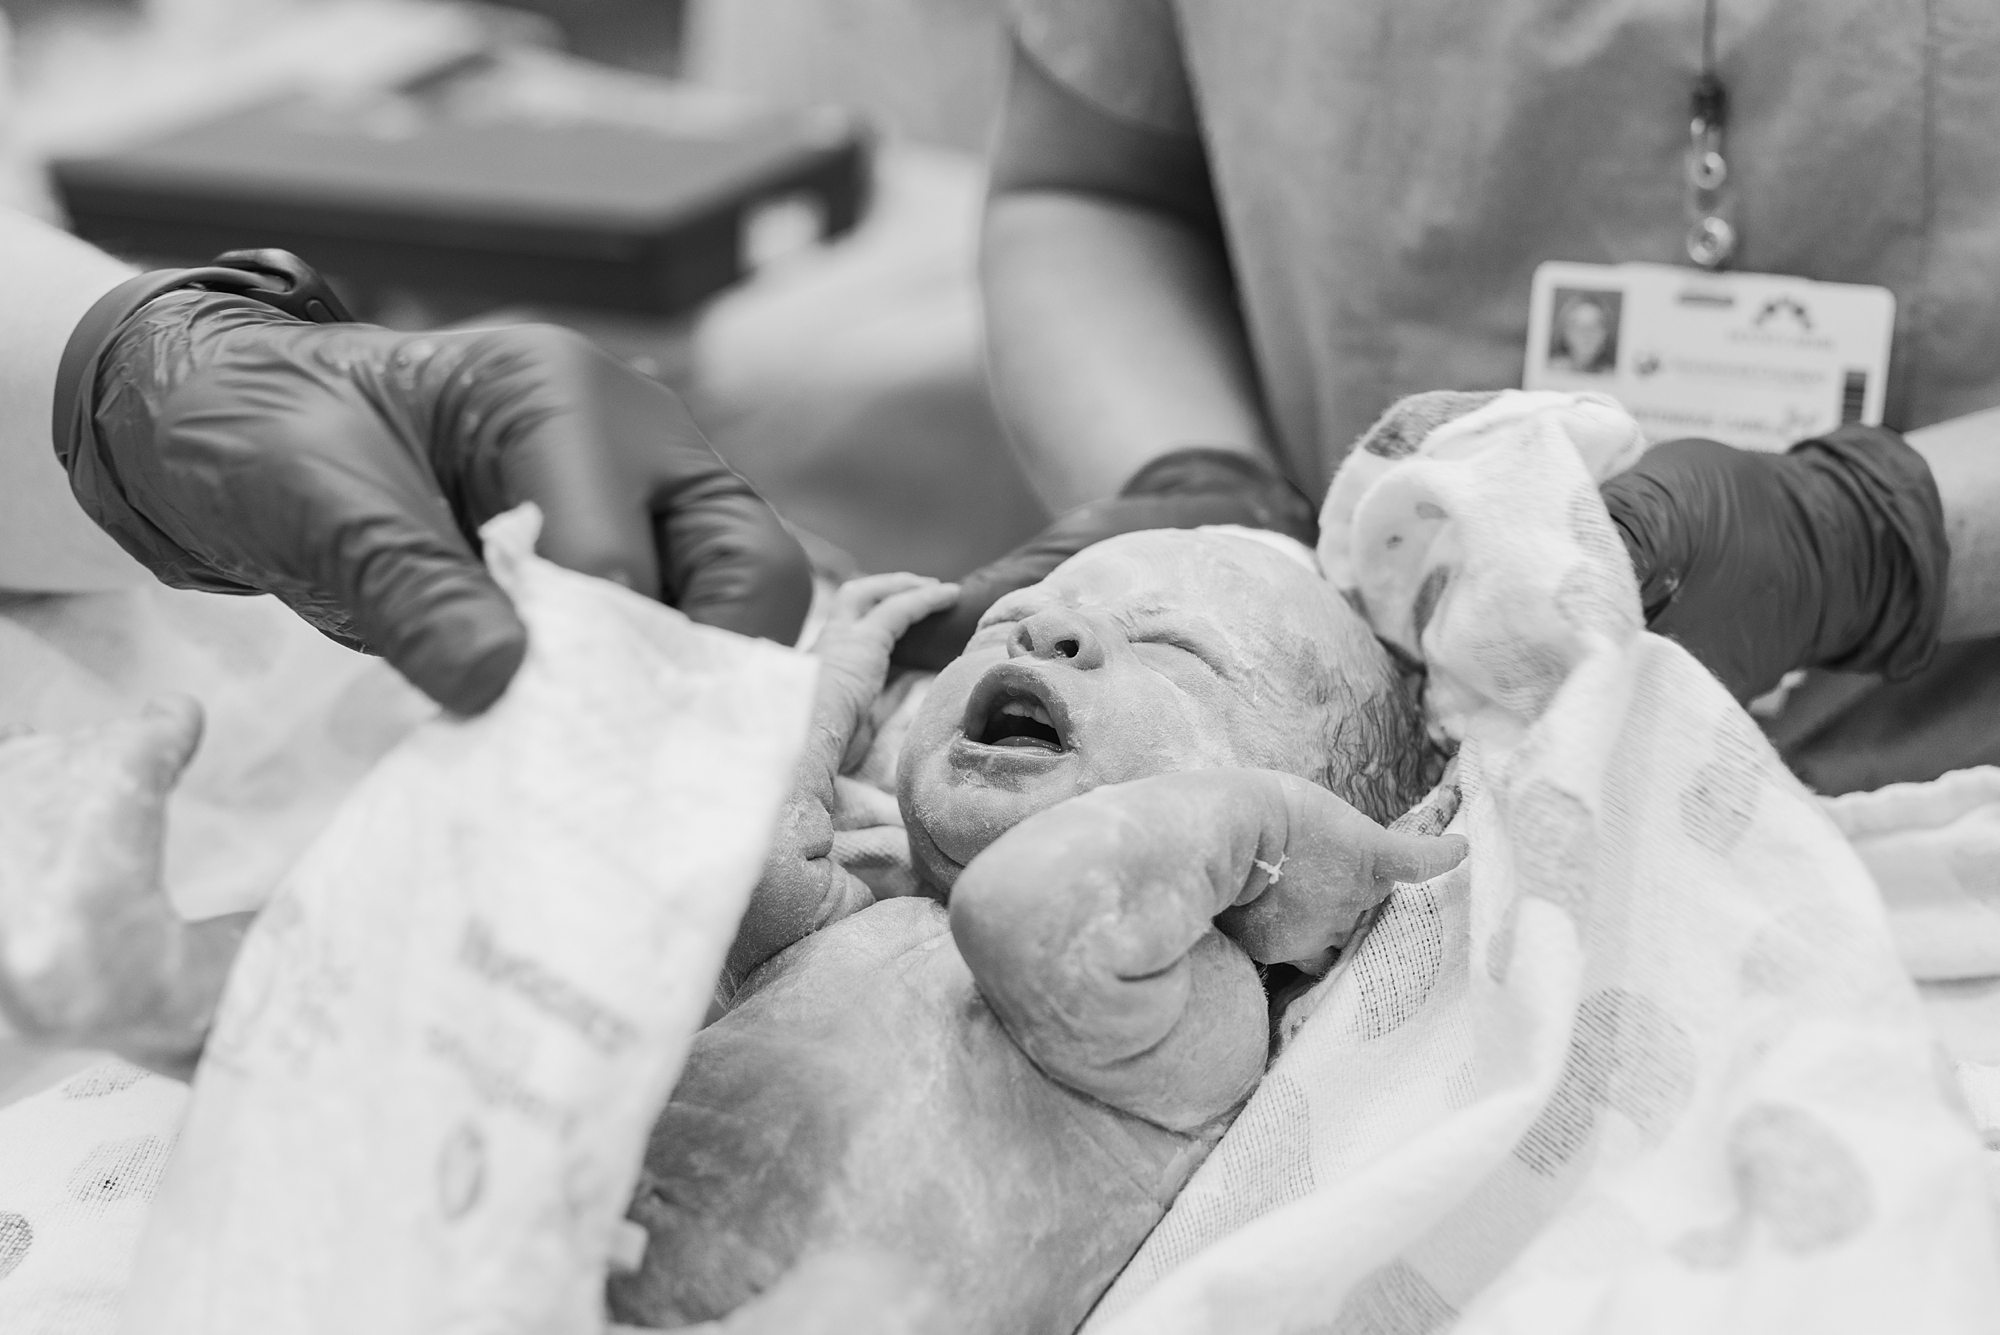 second baby born during twin birth delivery